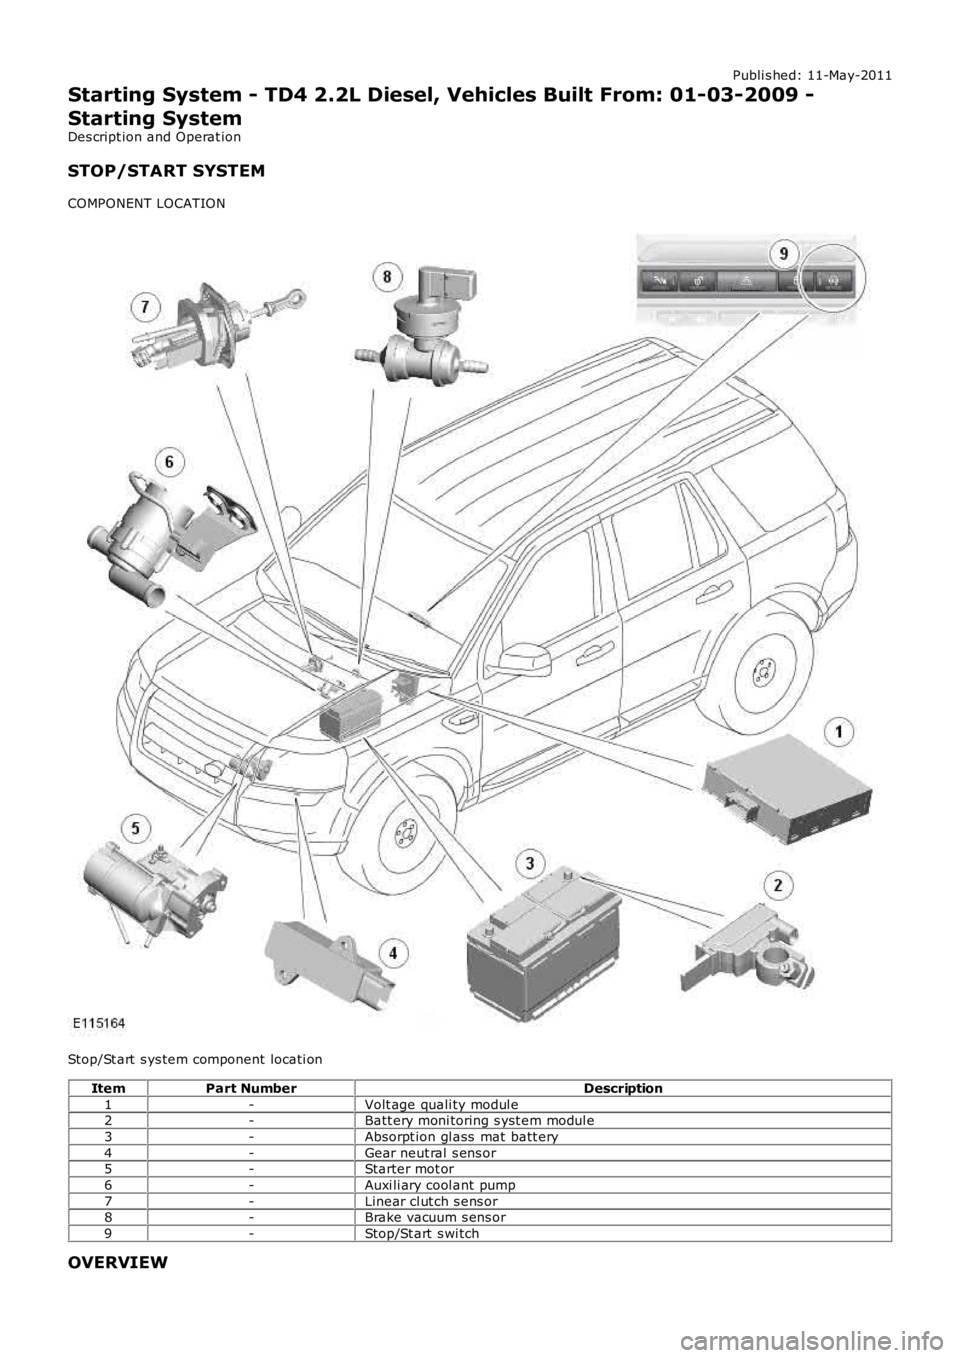 LAND ROVER FRELANDER 2 2006  Repair Manual Publi s hed: 11-May-2011
Starting System - TD4 2.2L Diesel, Vehicles Built From: 01-03-2009 -
Starting System
Des cript ion and Operat ion
STOP/START SYSTEM
COMPONENT LOCATION
Stop/St art  s ys tem co